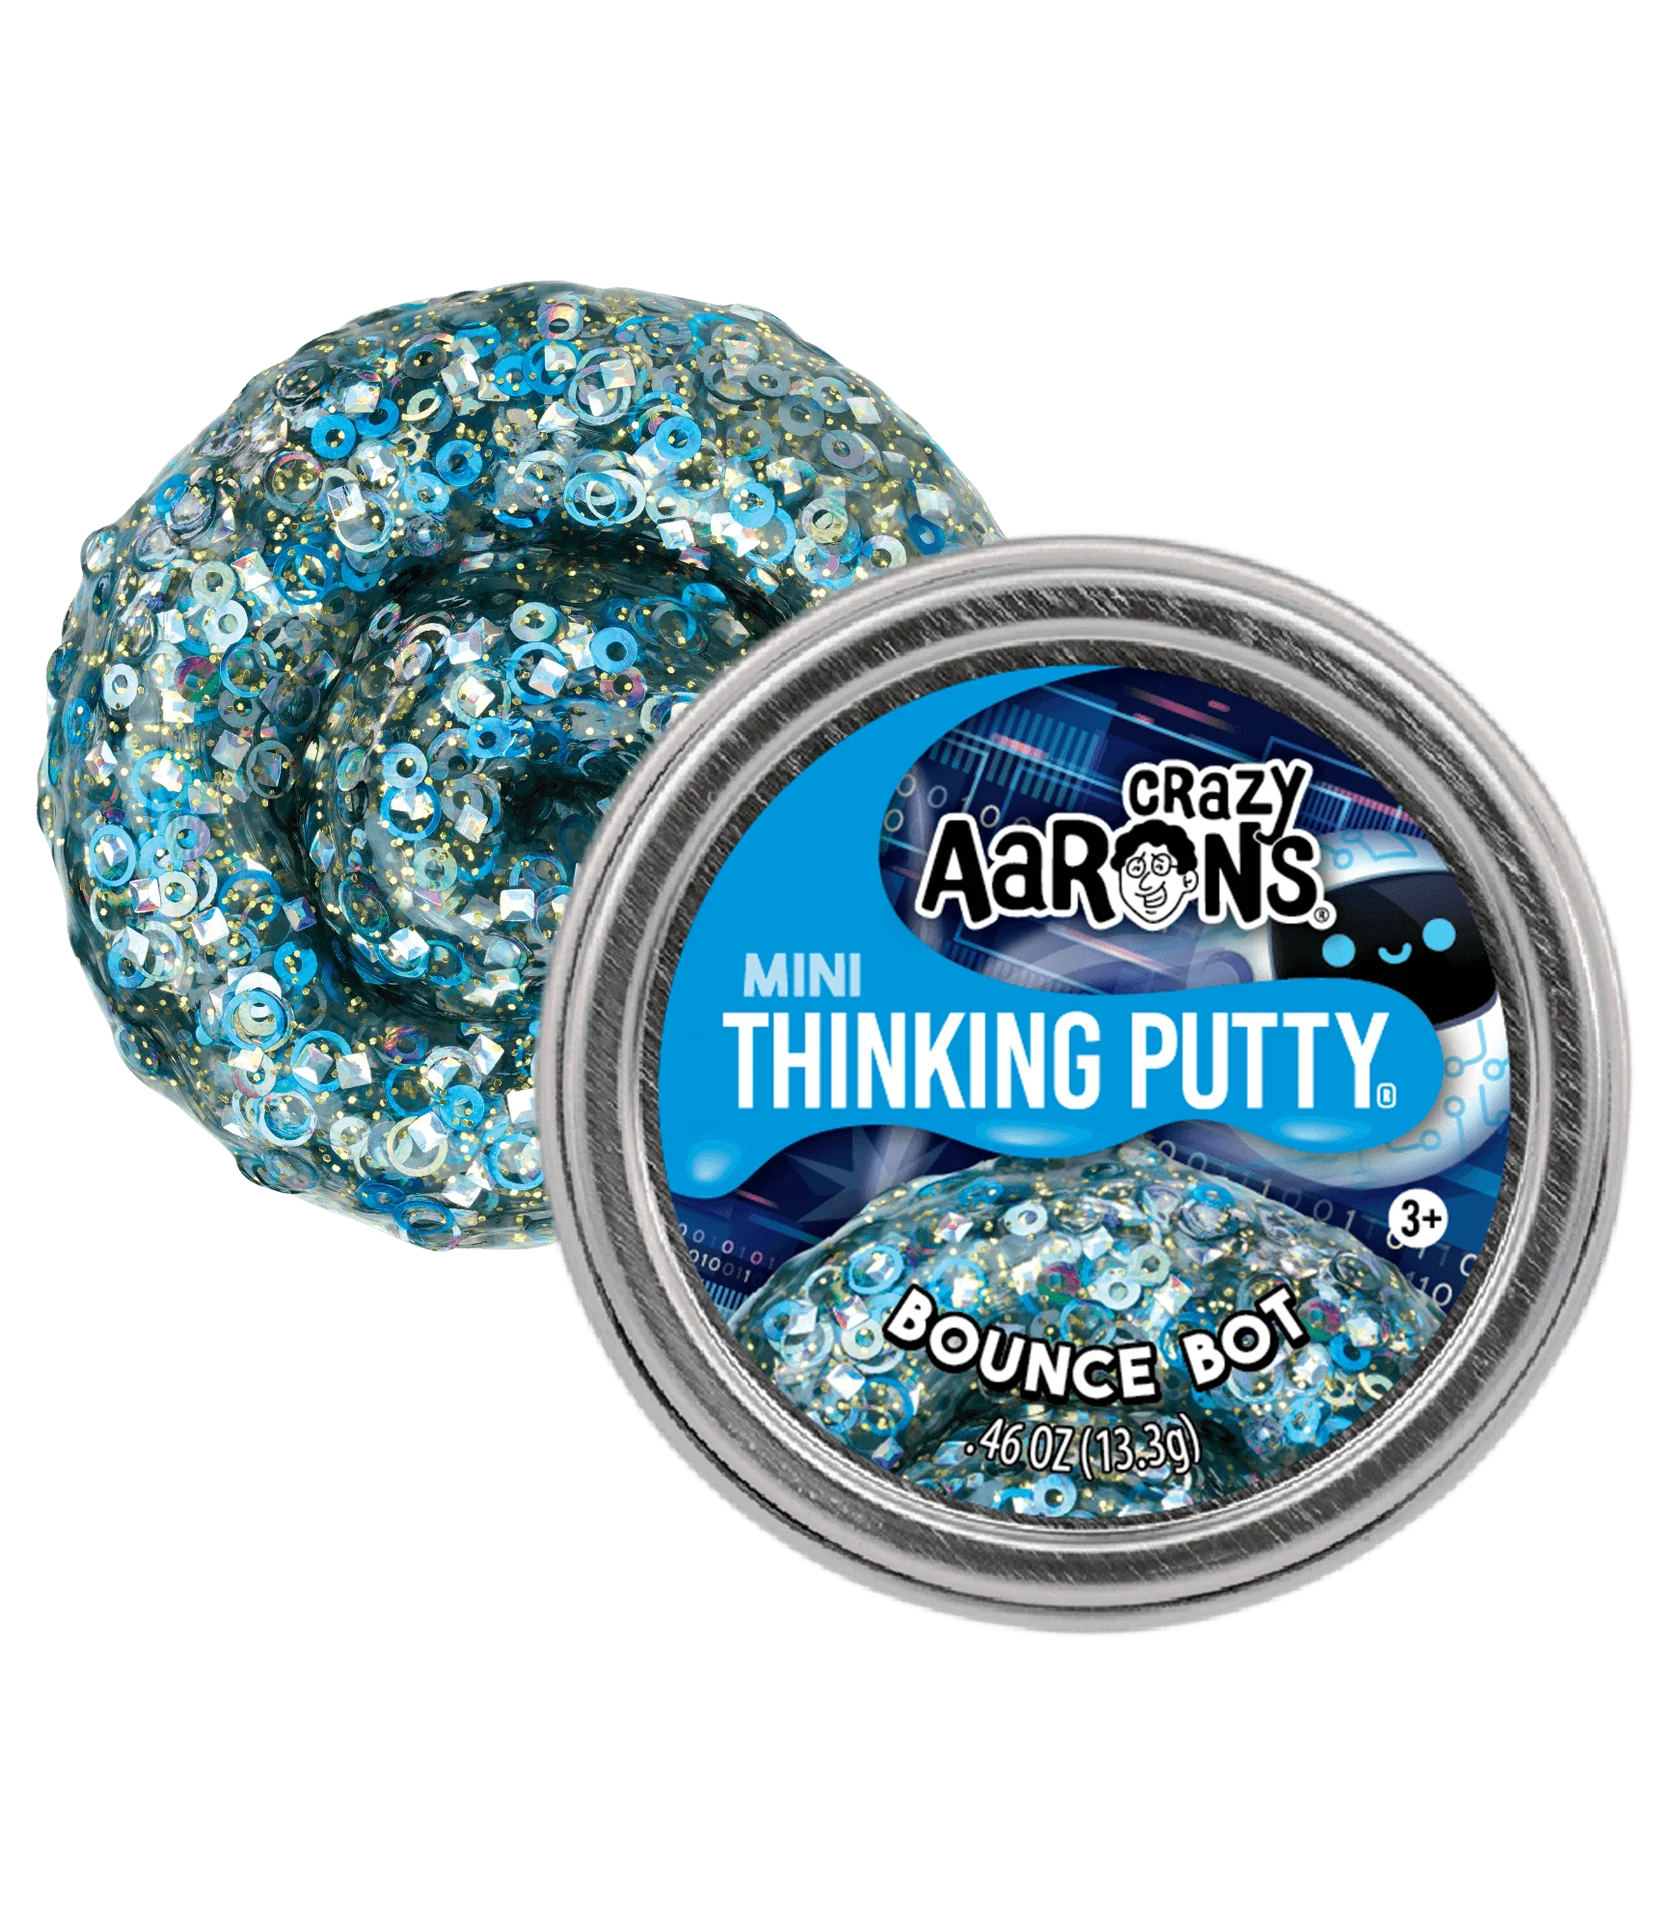 2” Bounce Bot Thinking Putty Tin by Crazy Aaron’s #AT003